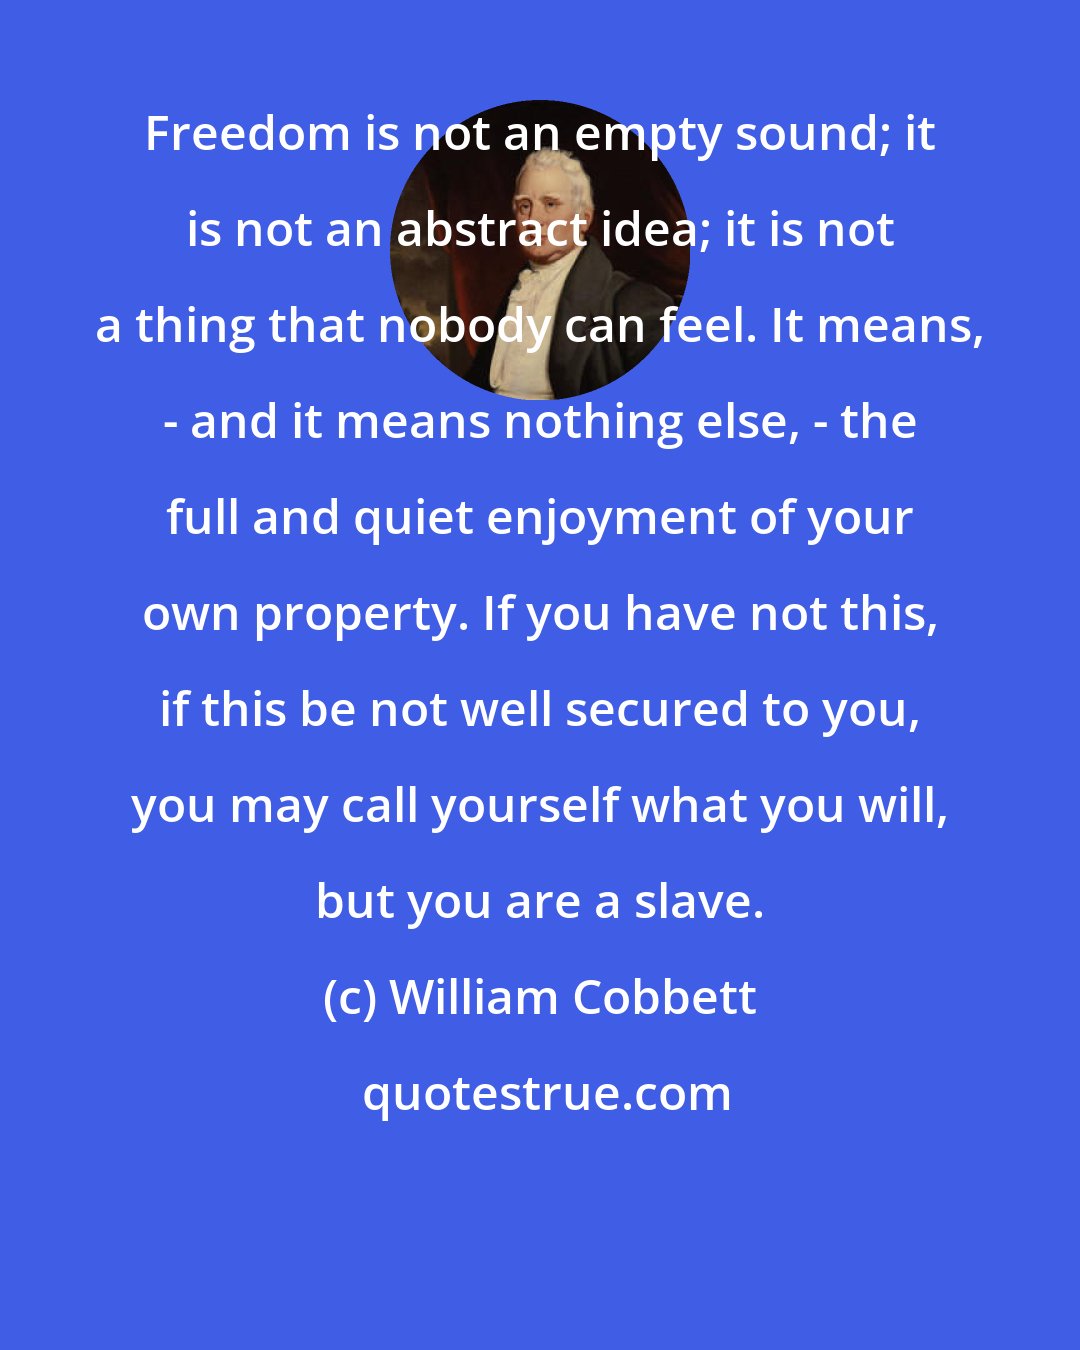 William Cobbett: Freedom is not an empty sound; it is not an abstract idea; it is not a thing that nobody can feel. It means, - and it means nothing else, - the full and quiet enjoyment of your own property. If you have not this, if this be not well secured to you, you may call yourself what you will, but you are a slave.